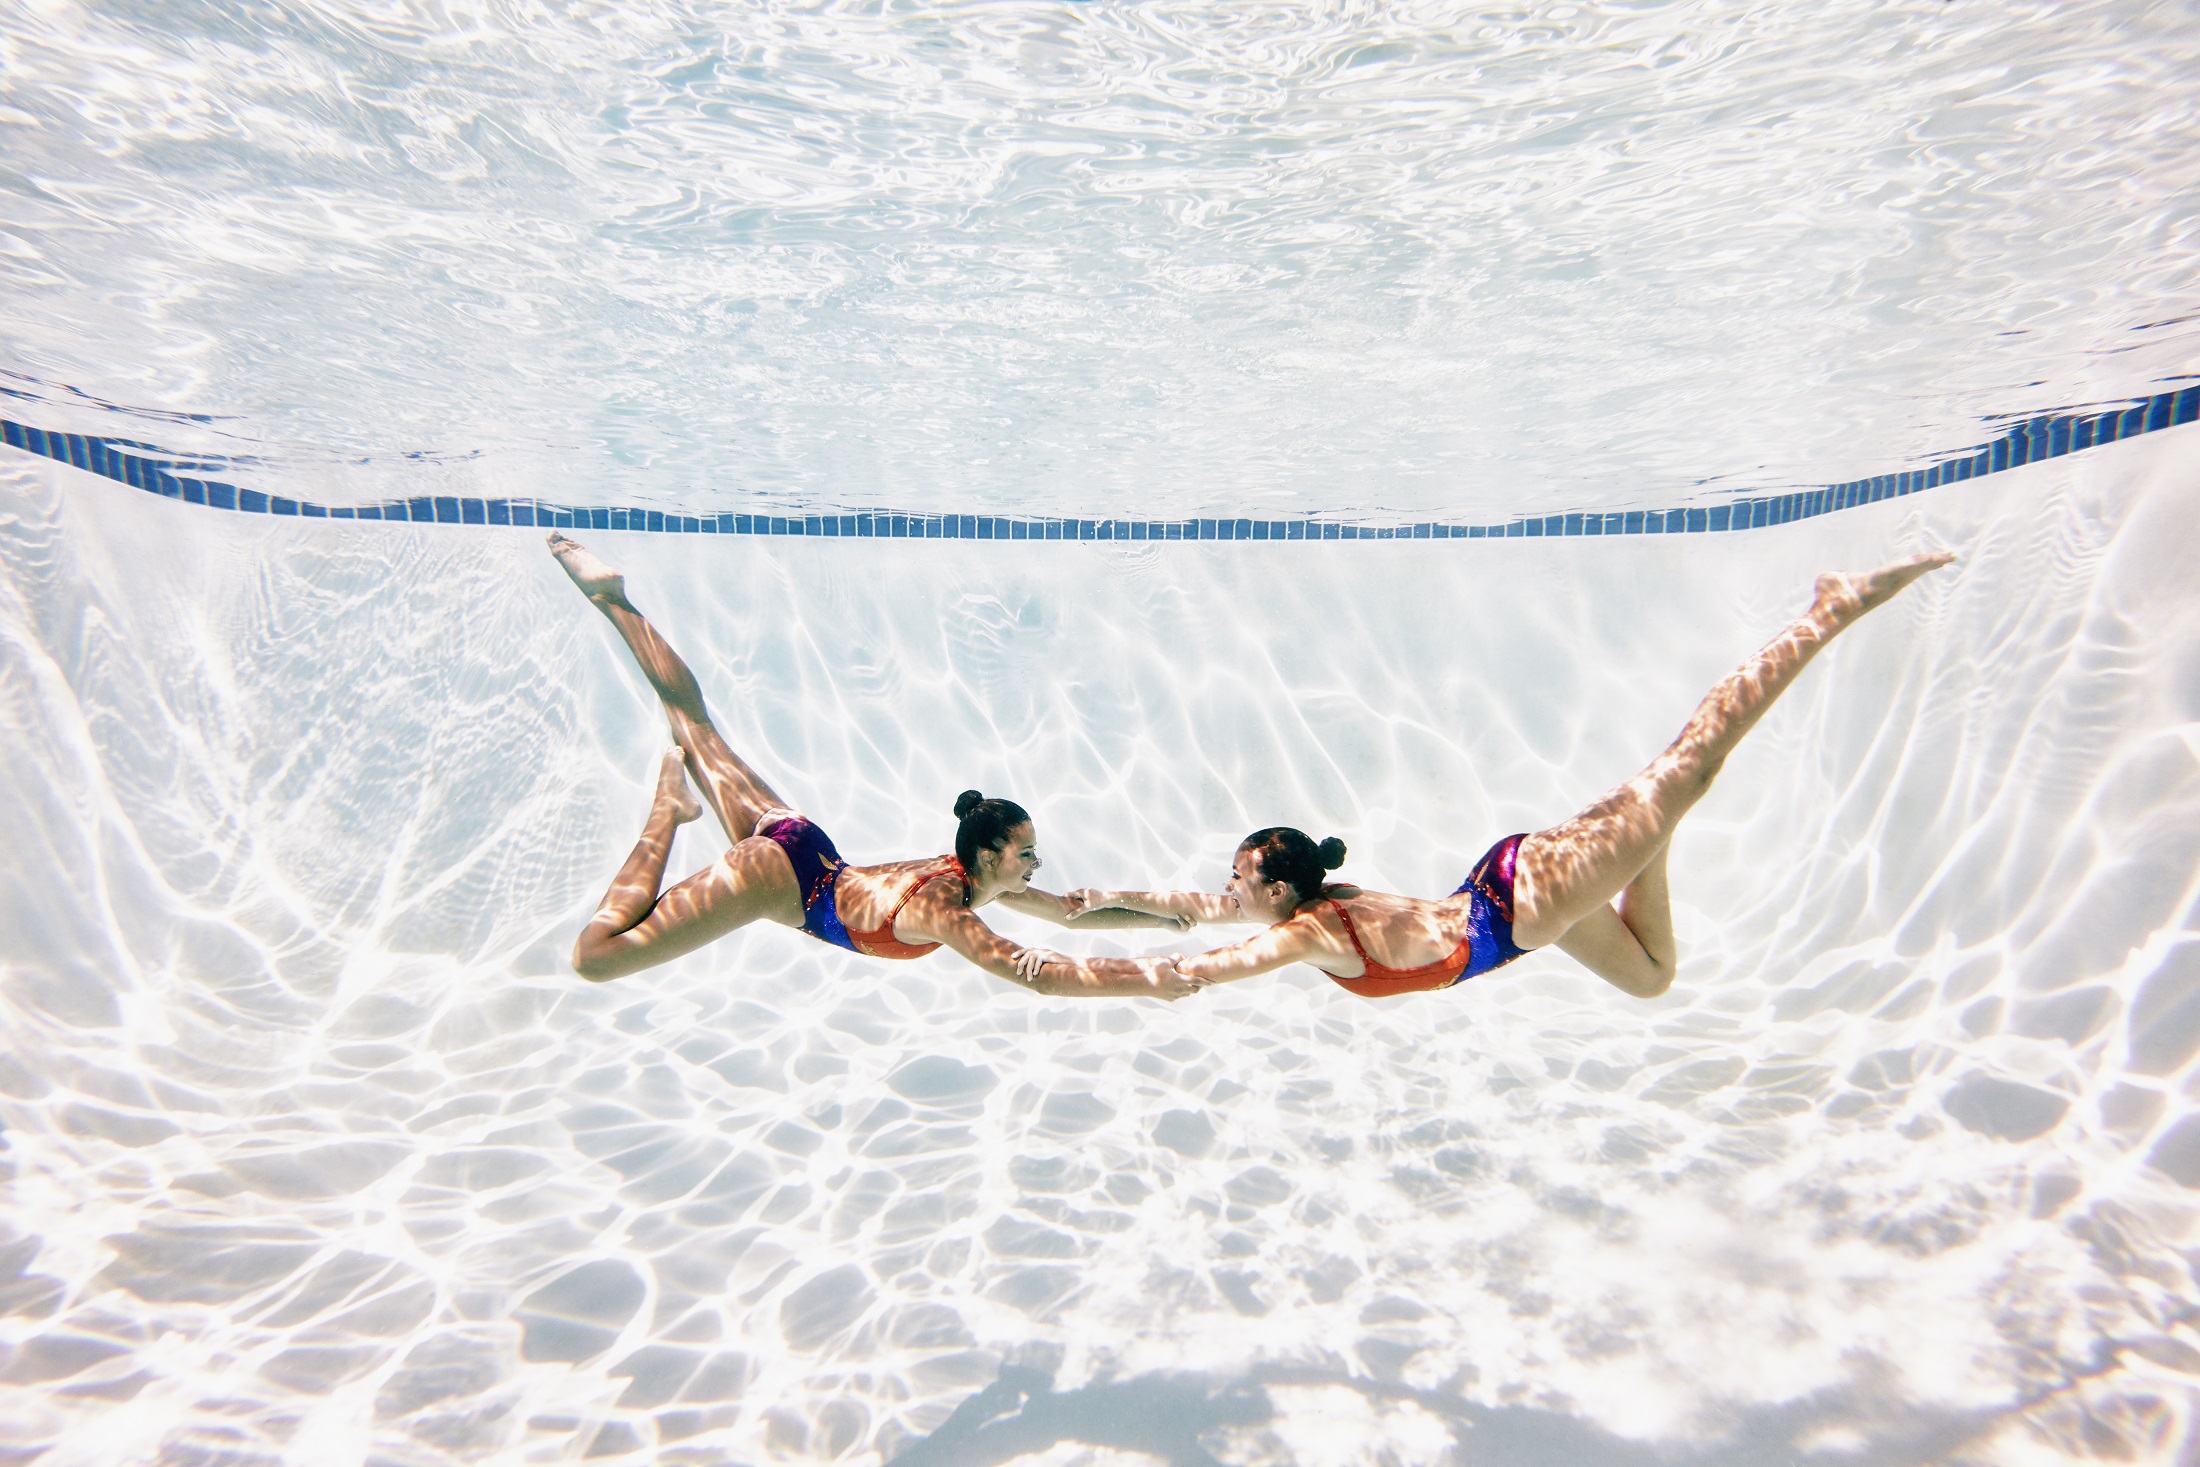 Two female artistic swimmers holding hands underwater performing routine underwater view